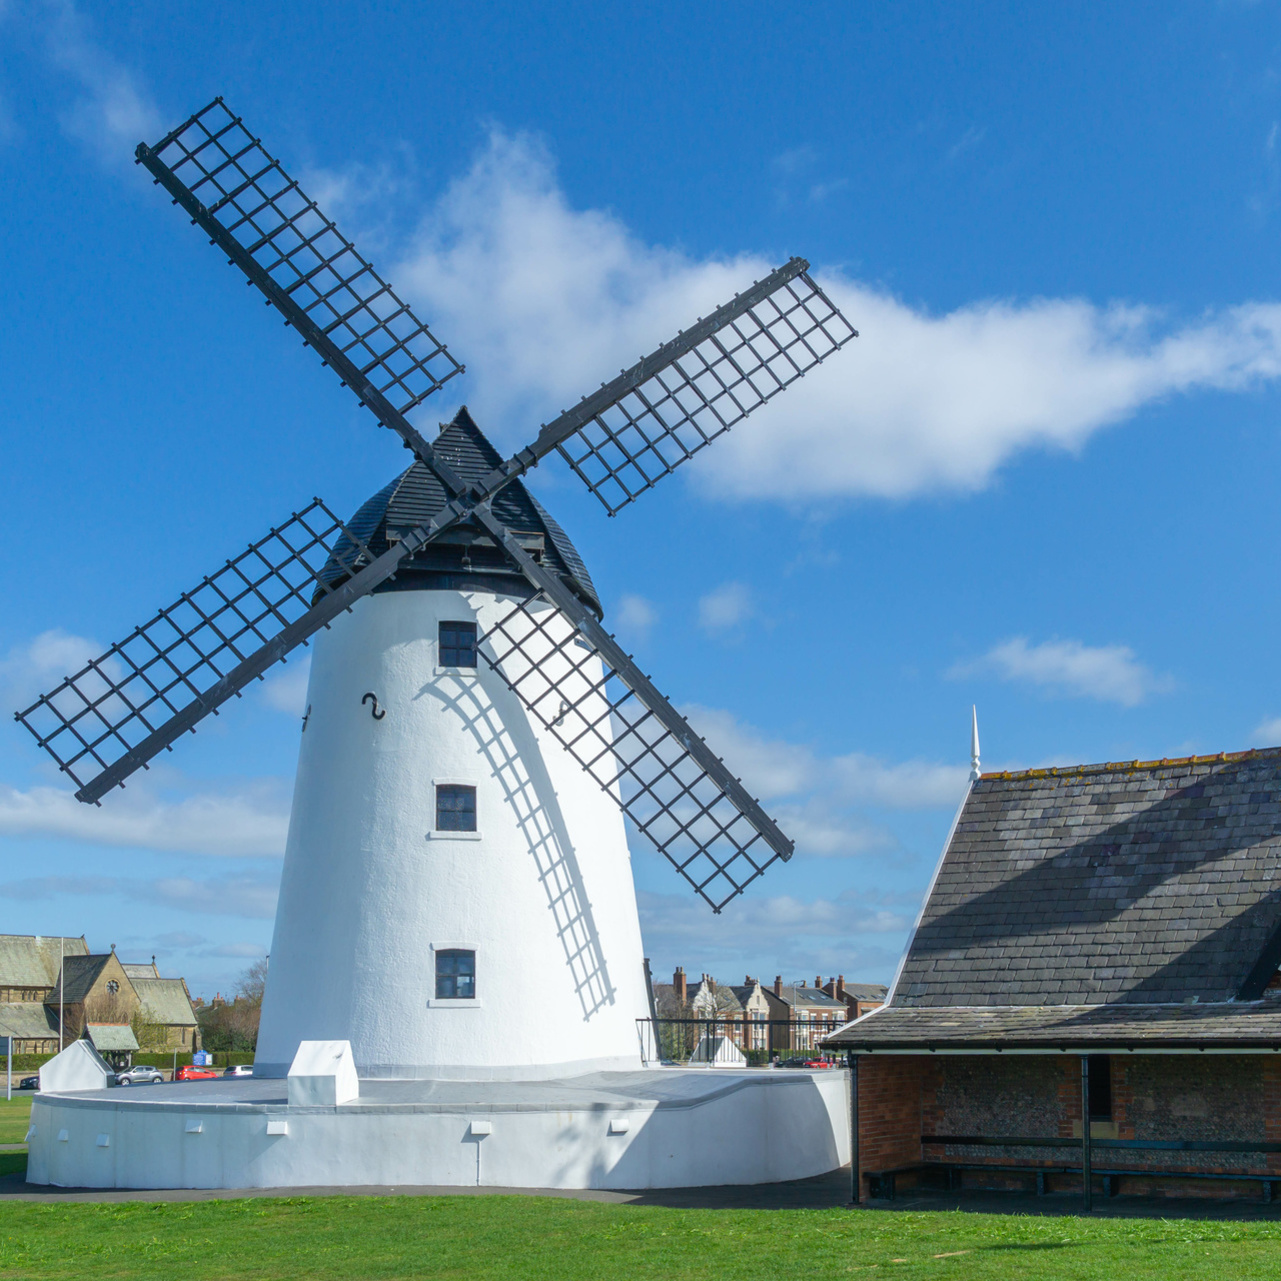 Lytham Windmill; Our Solicitors in Lytham work from The Old Bakery, Green Street, Lytham, FY8 5LG